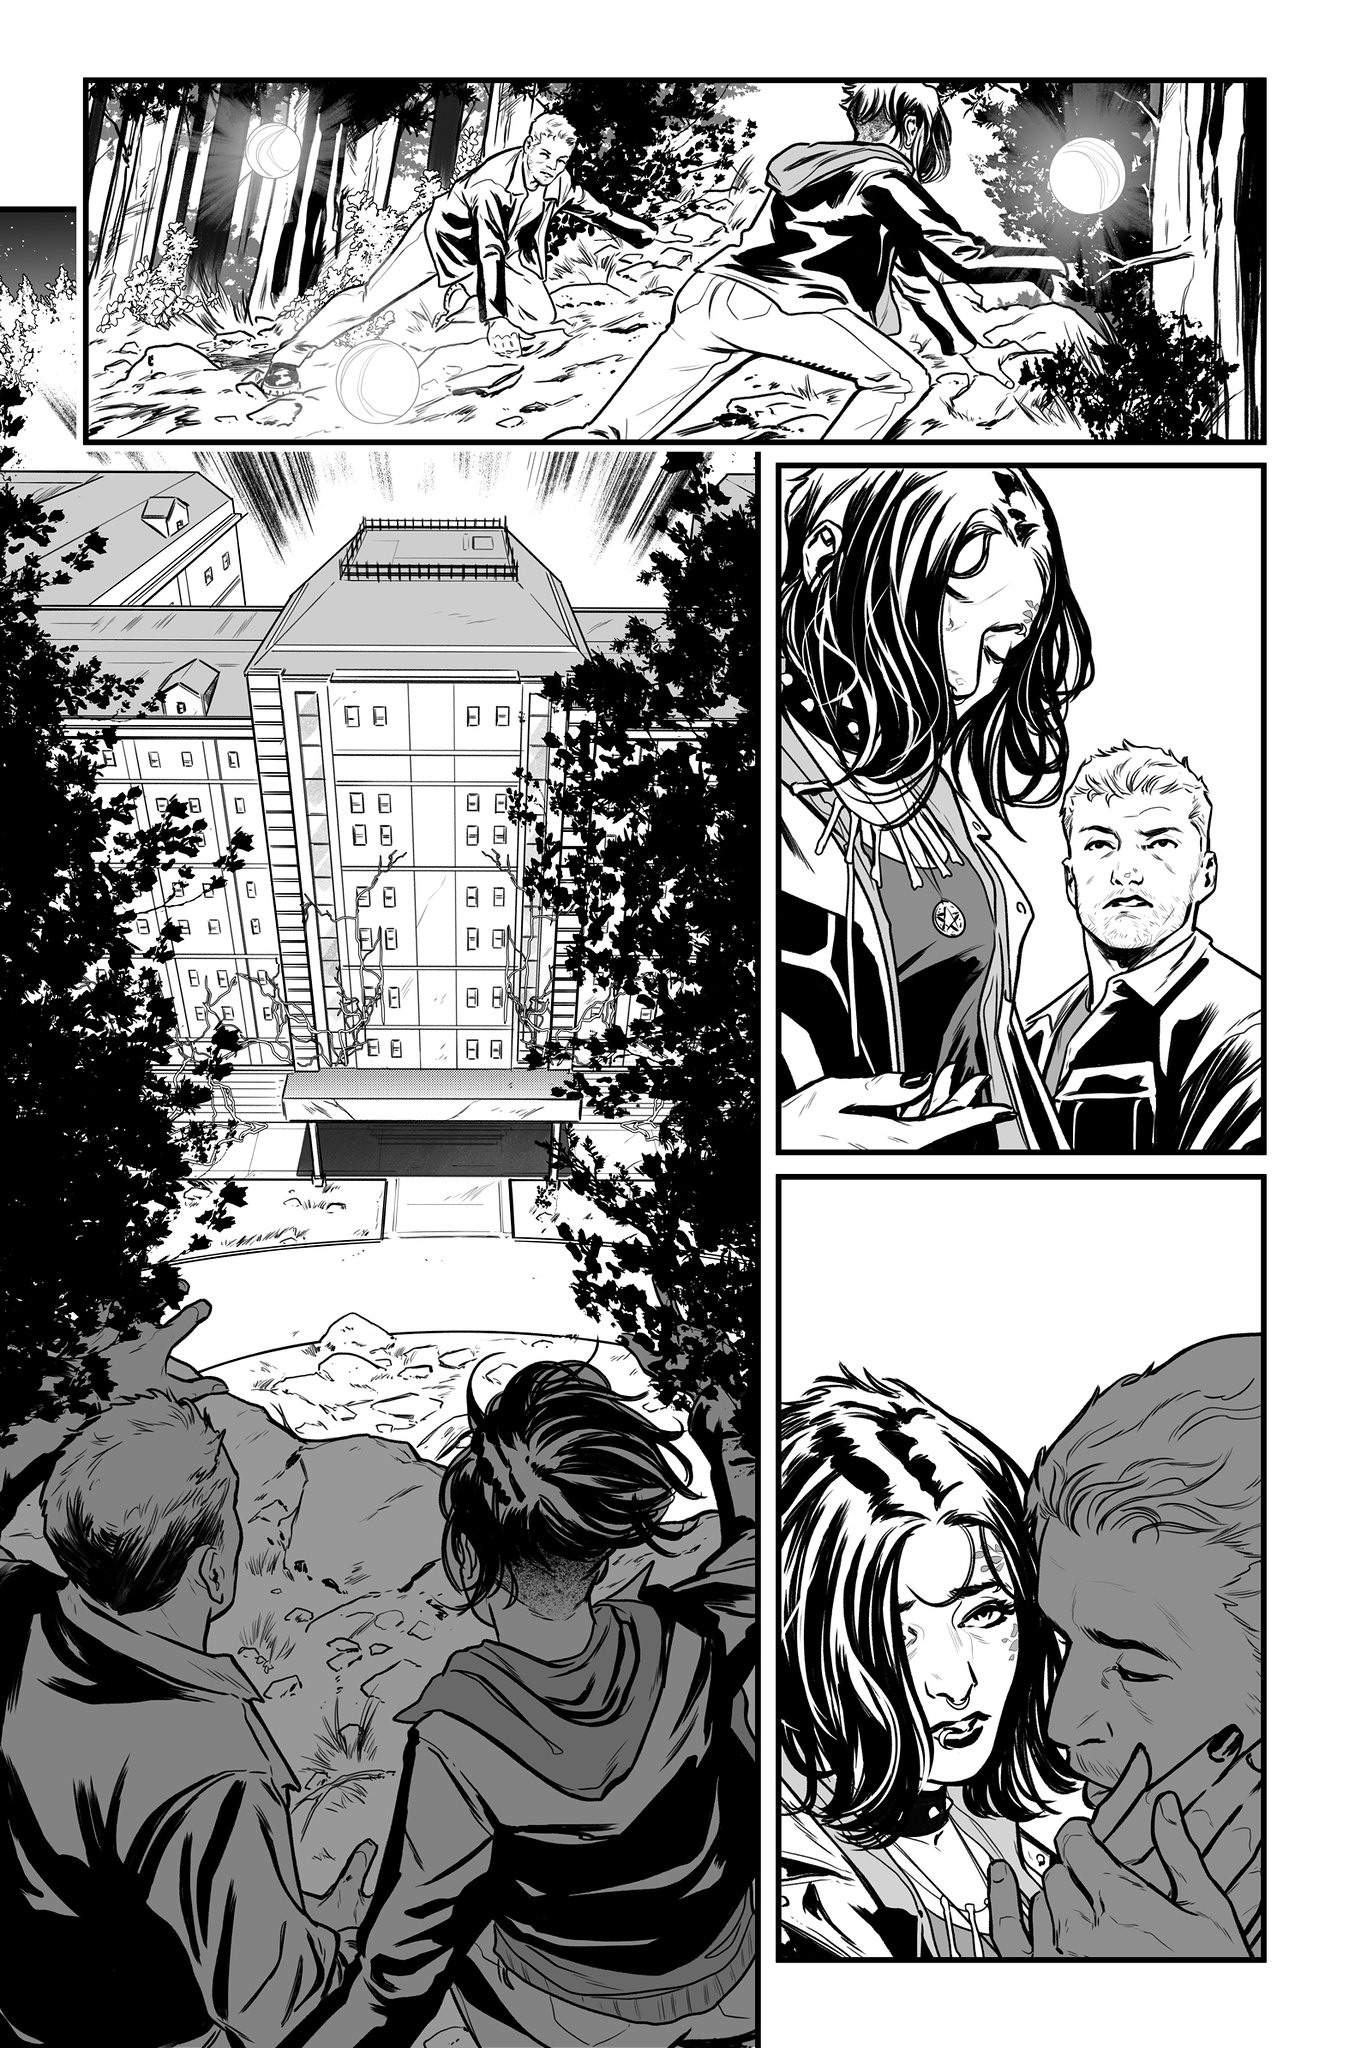 GHOSTRIDER#20_PAGE6_INKS